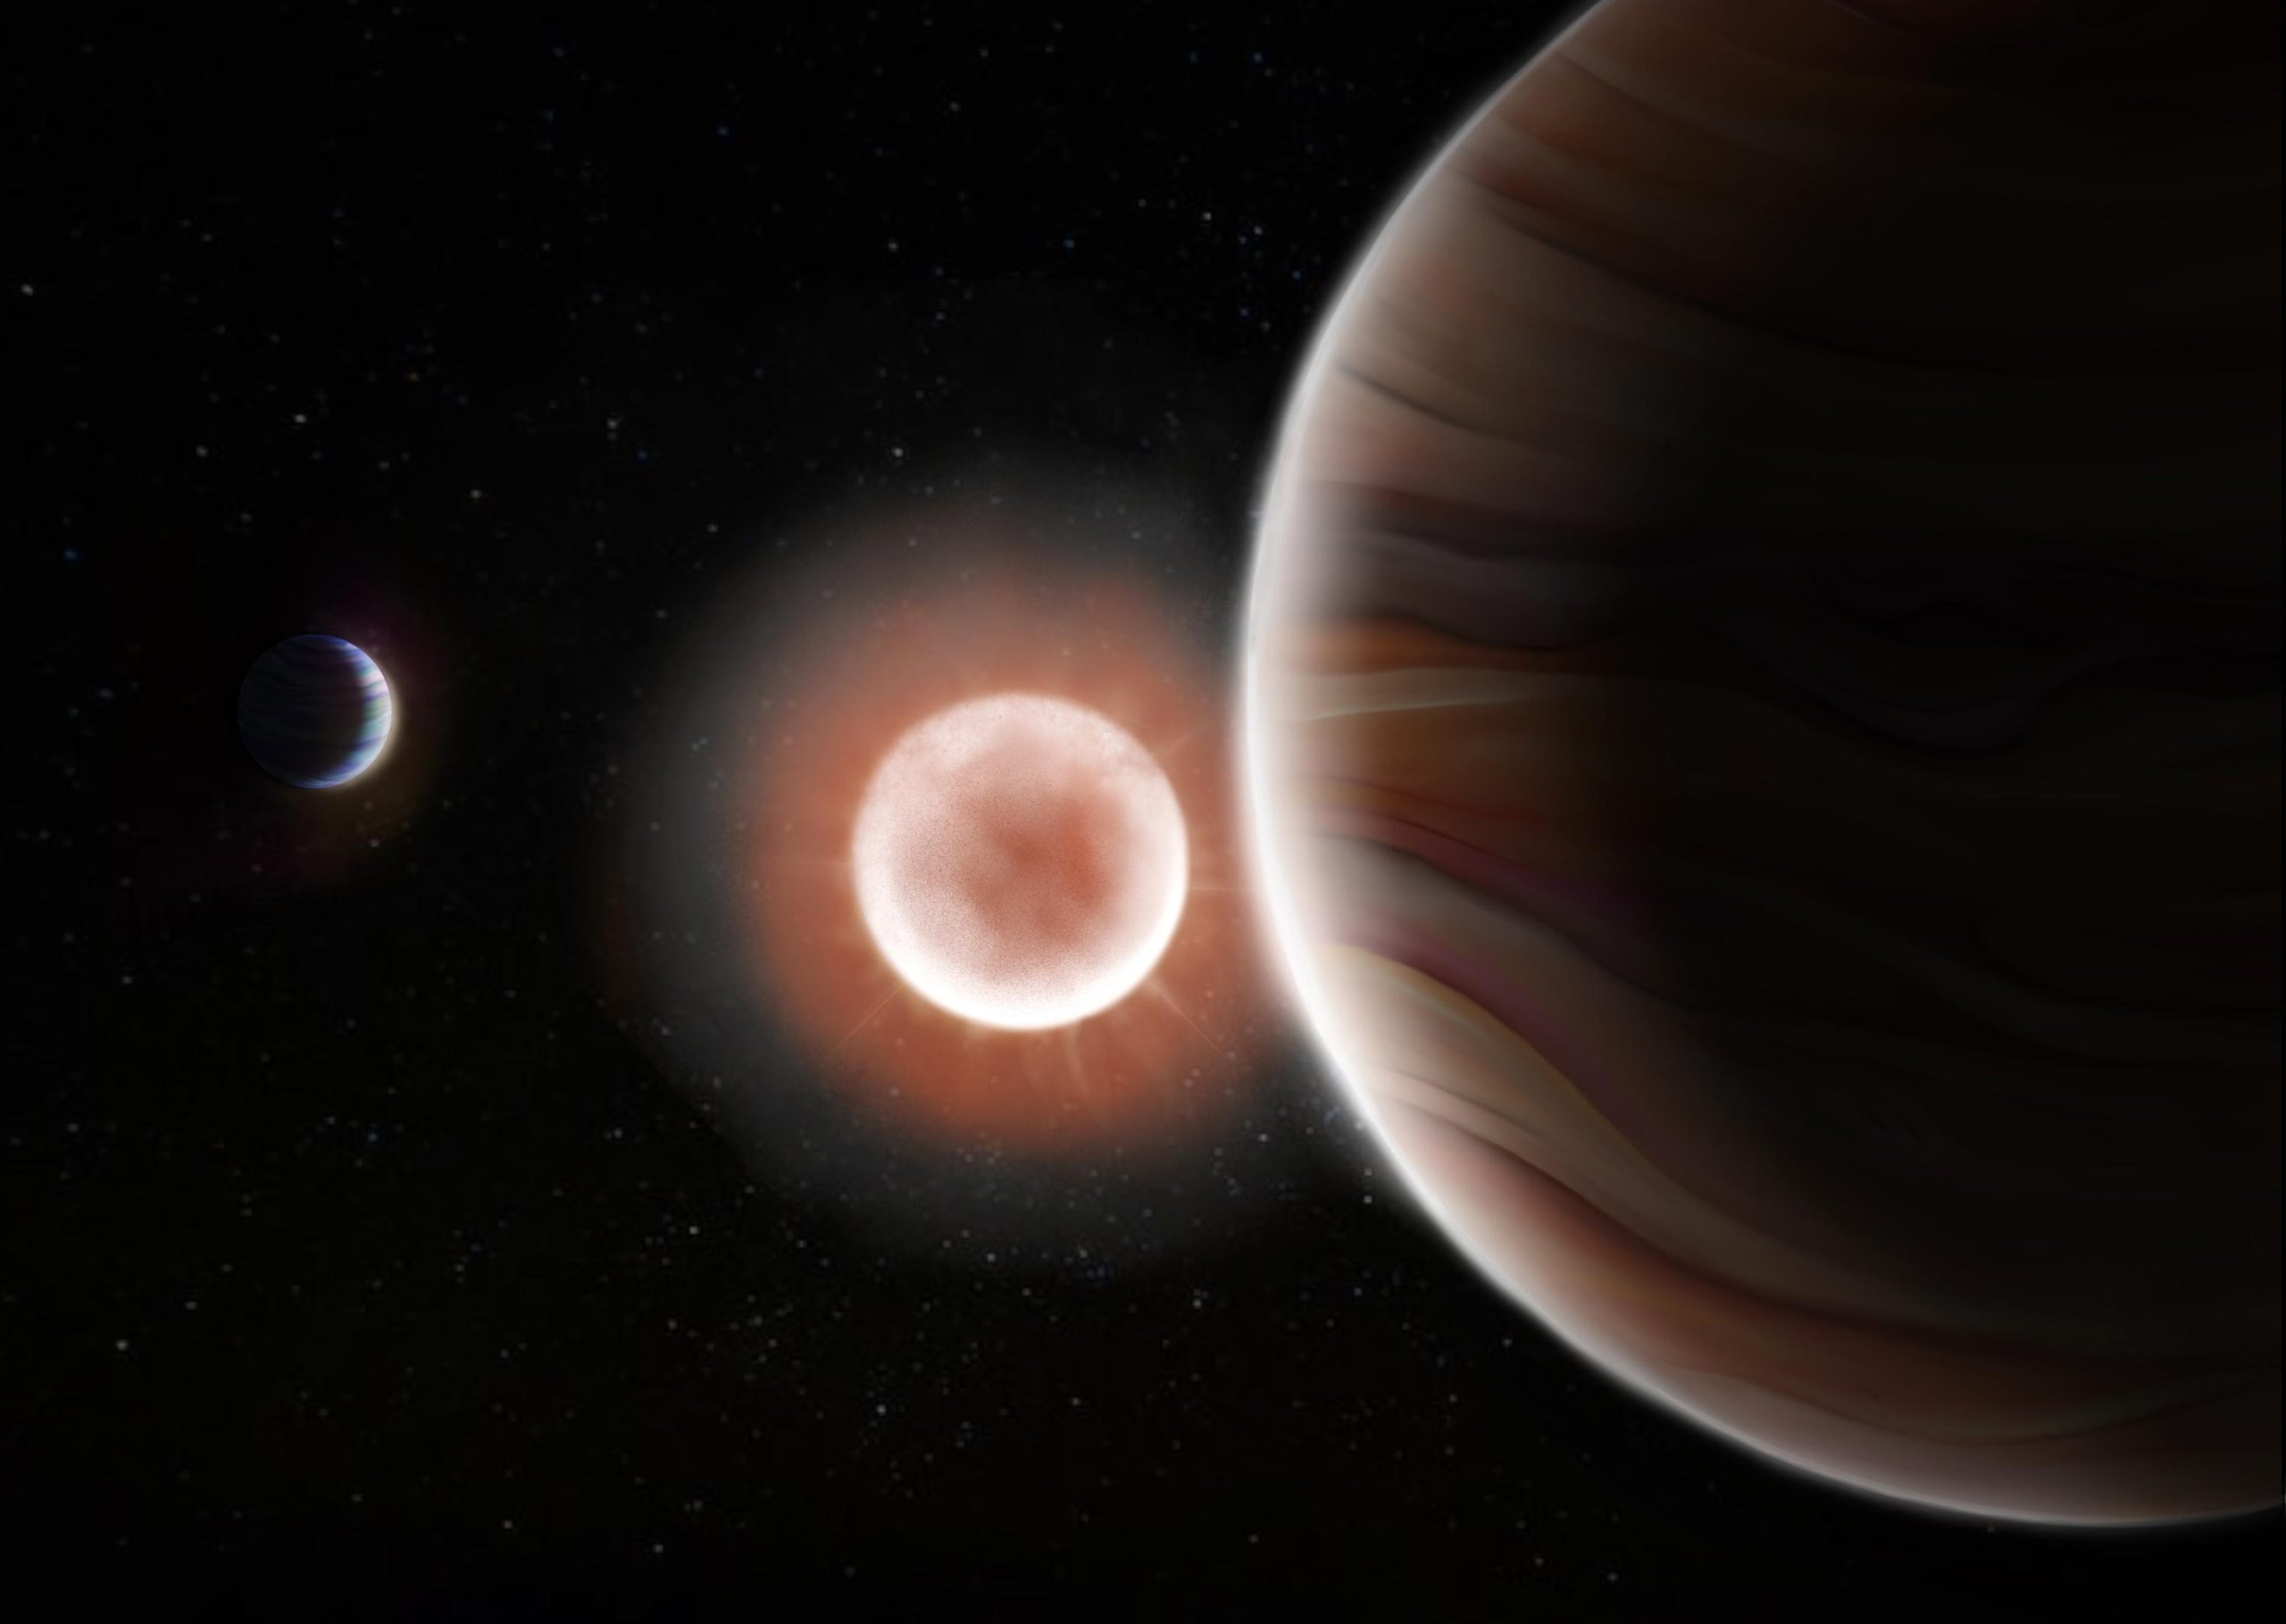 Astronomers Uncover Exoplanet With an Unprecedented Orbit